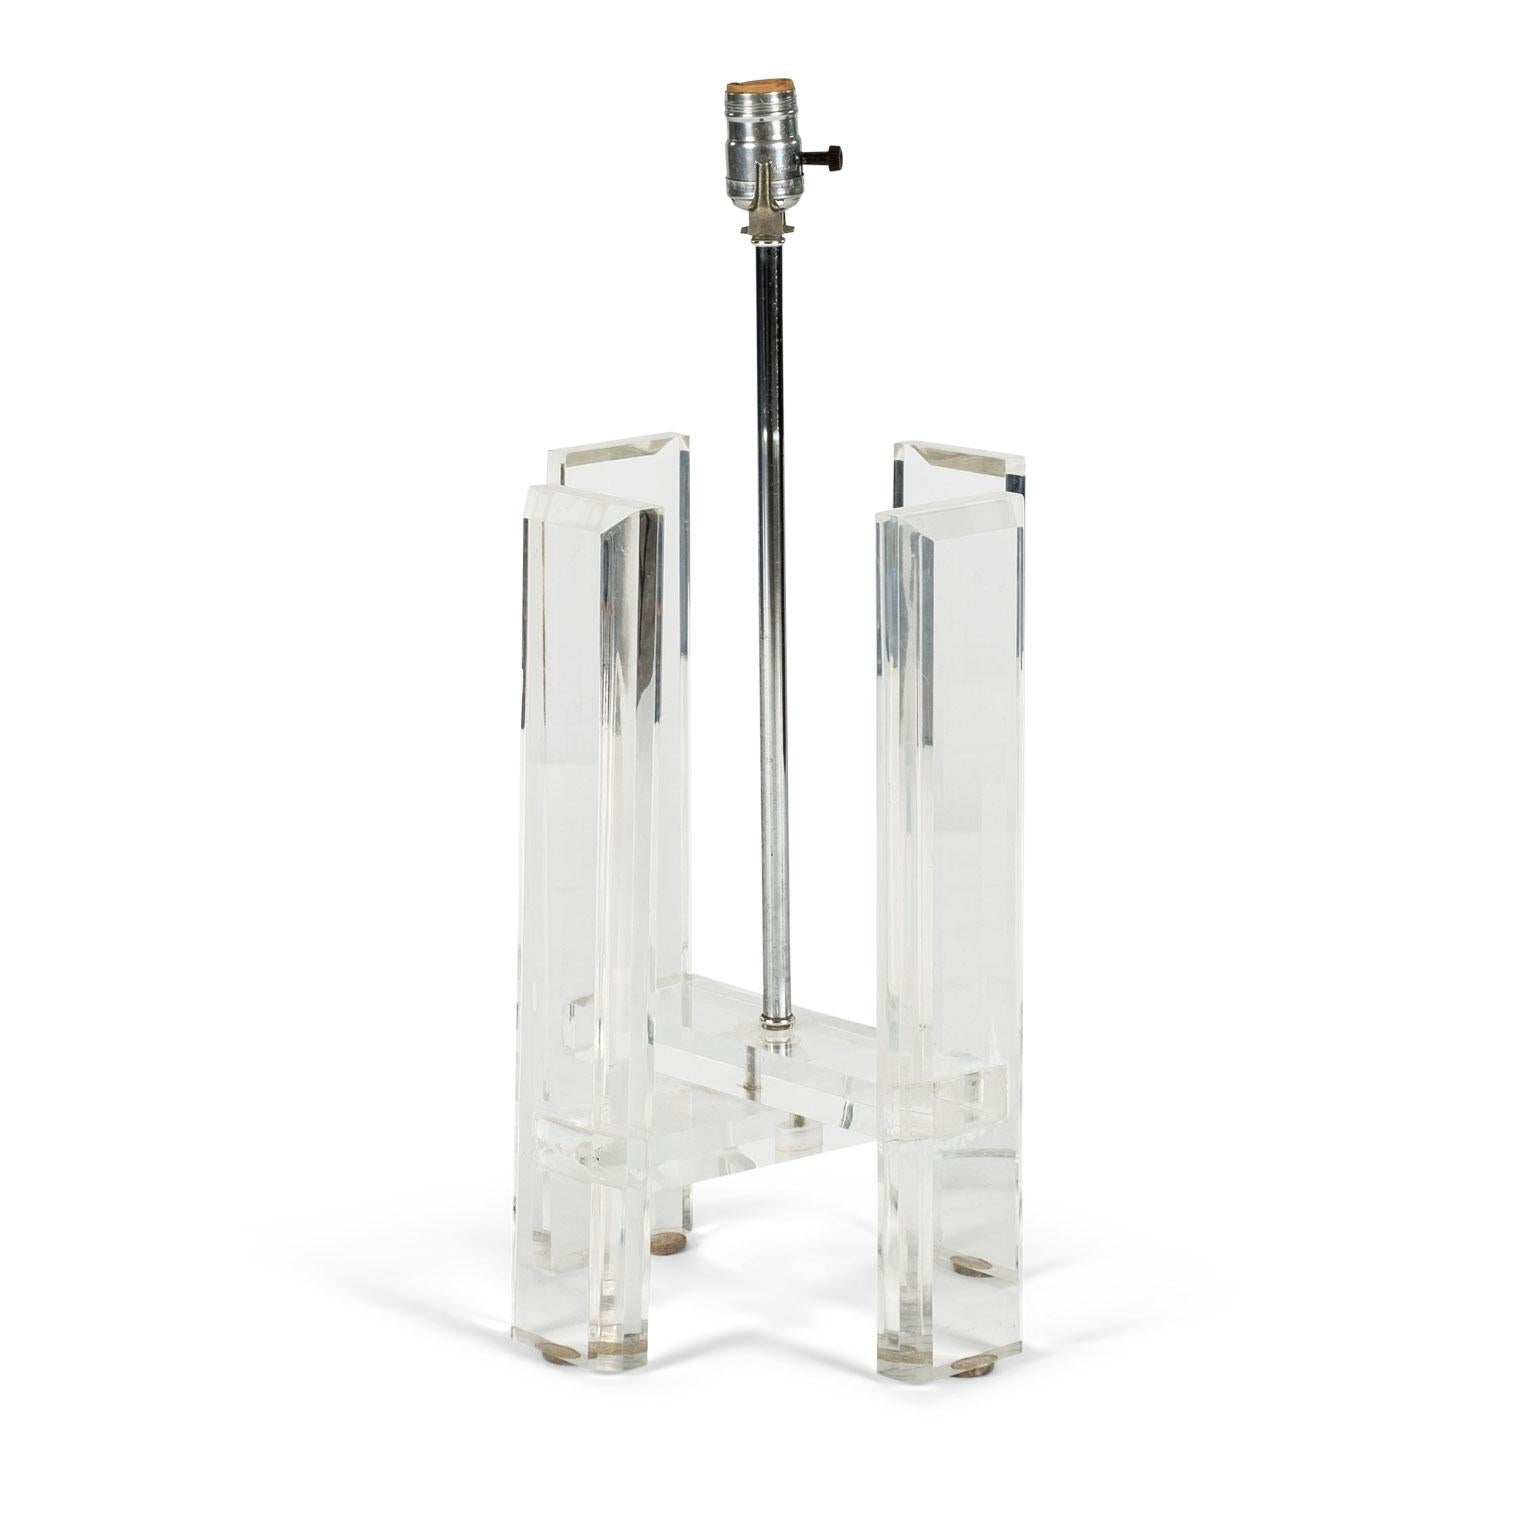 Mid-century Lucite table lamp accented with anodized aluminum central rod. Heavy Lucite body circa 1970s, newly wired for use within the USA using UL listed parts. Sold without shade. Grass cloth shade pictured in last three images sold separately